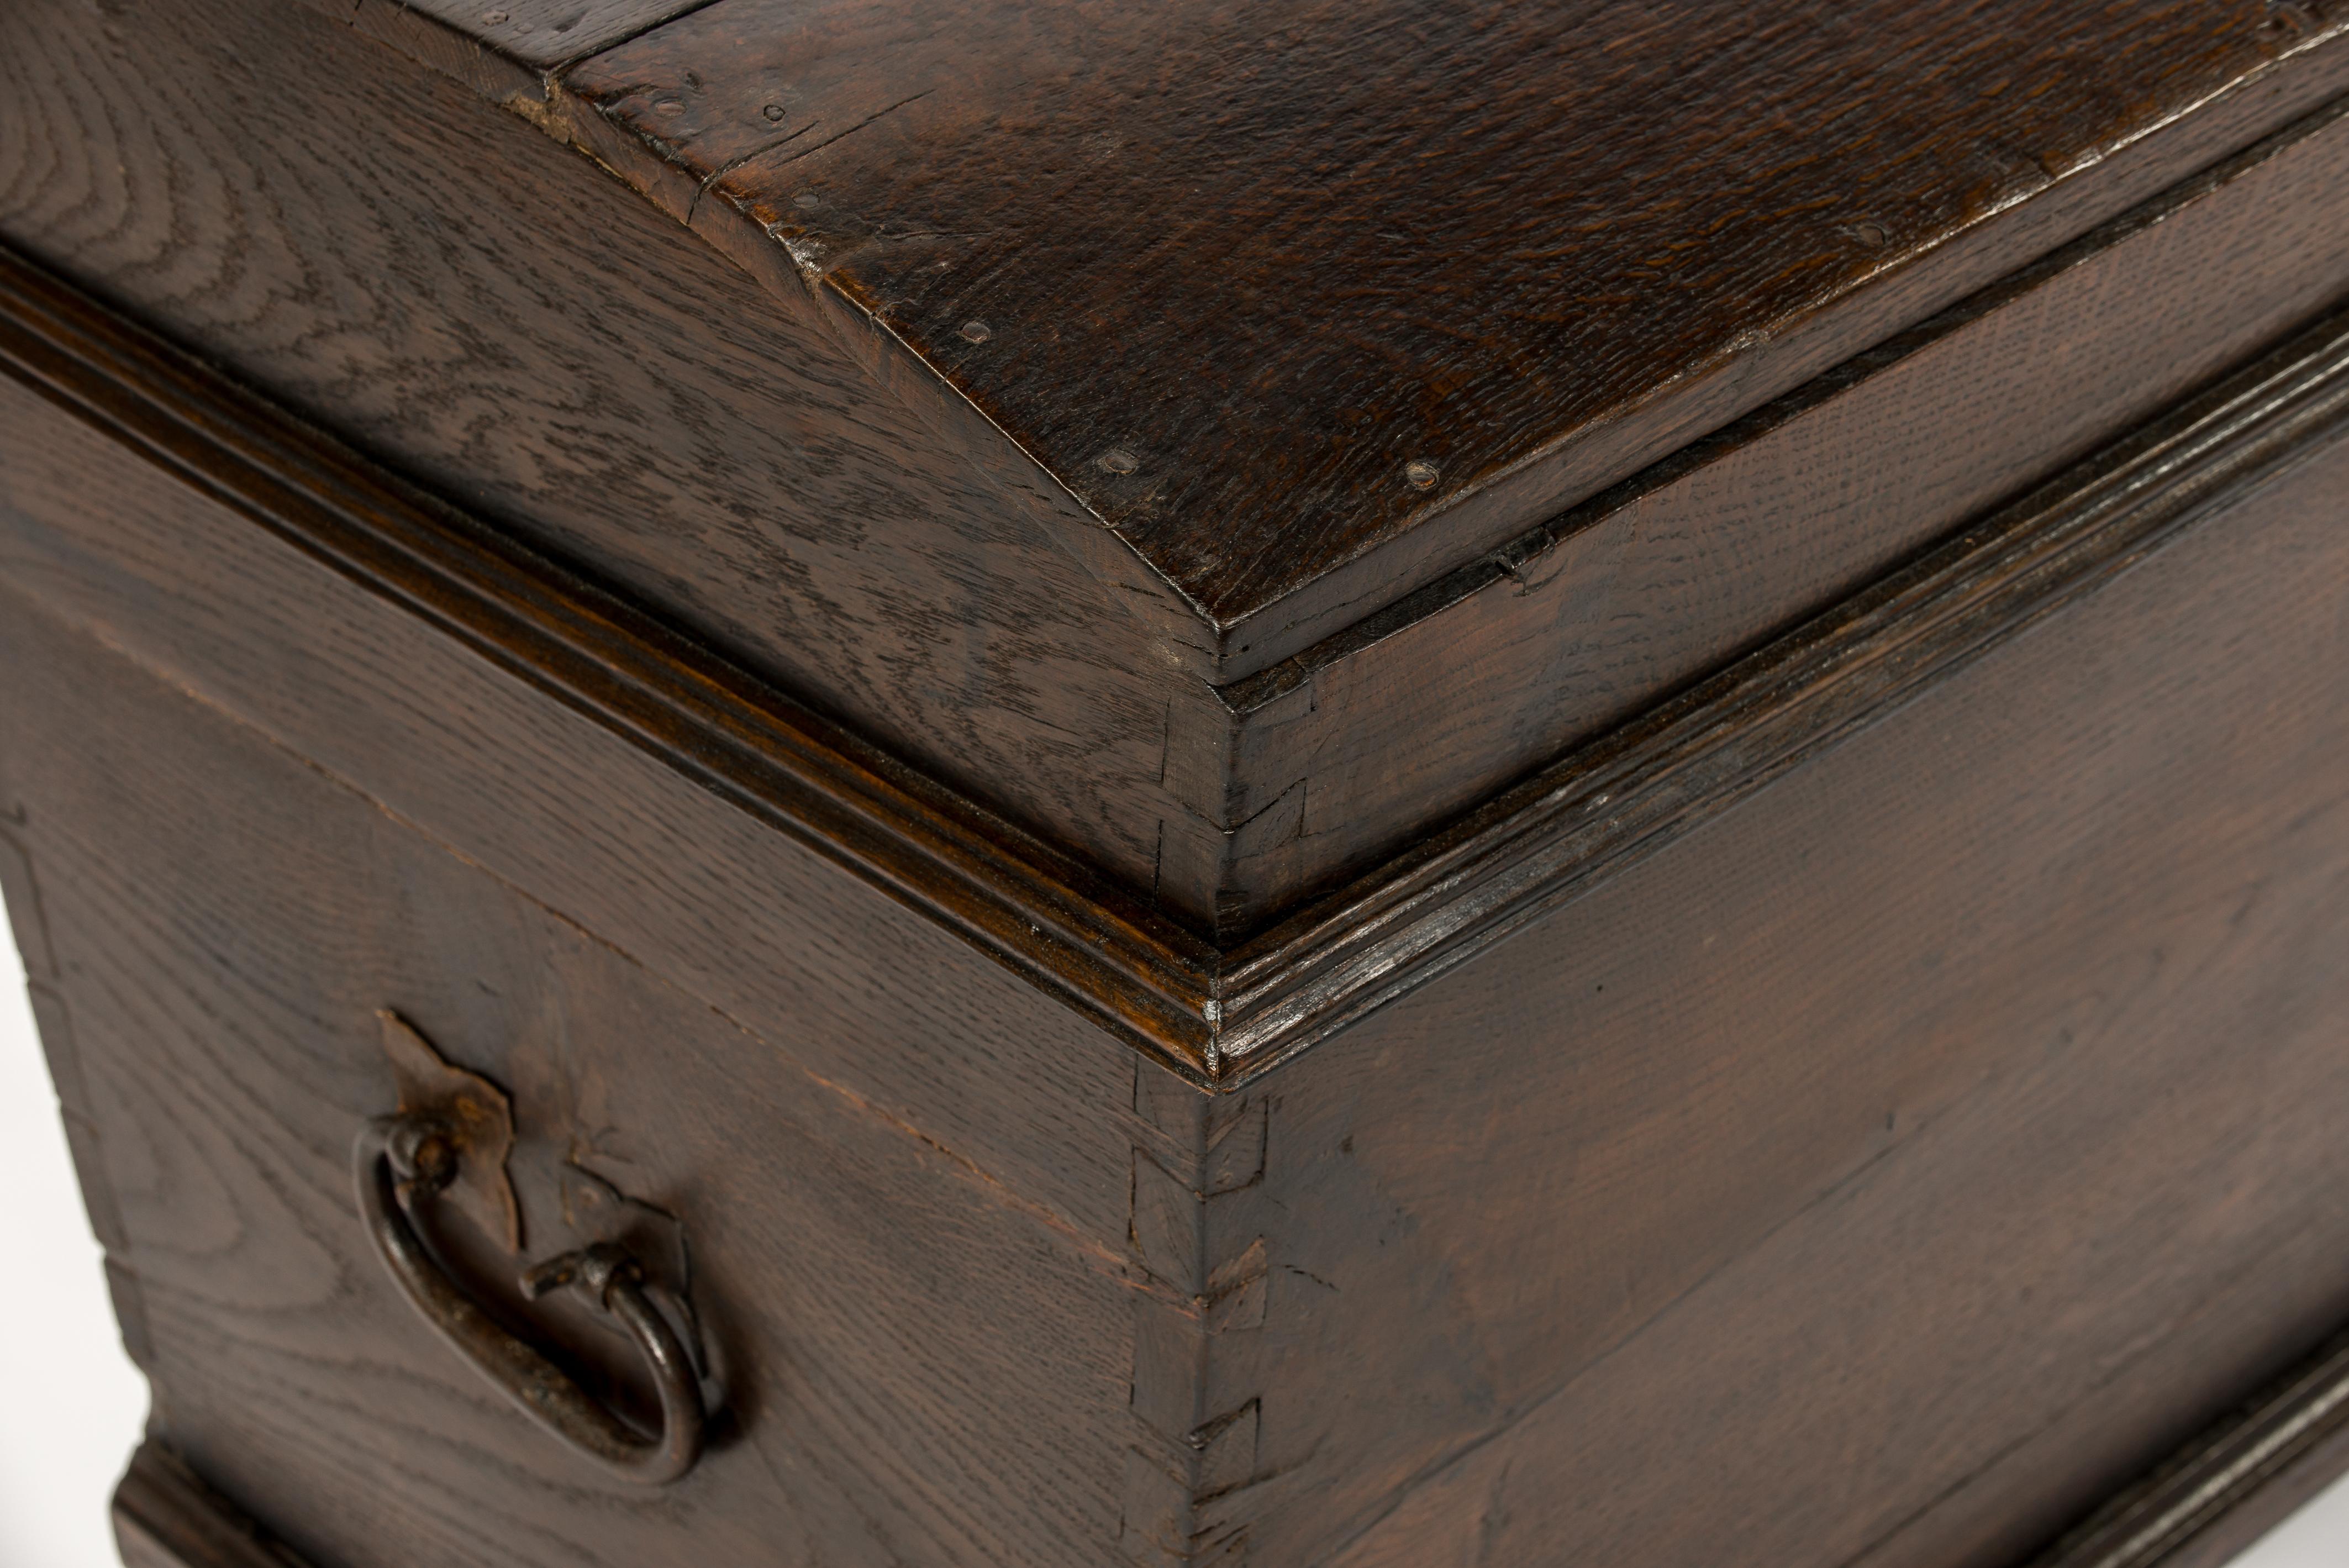 Antique 19th Century German Solid Oak Dome Top Chest Trunk Coffer Box For Sale 10